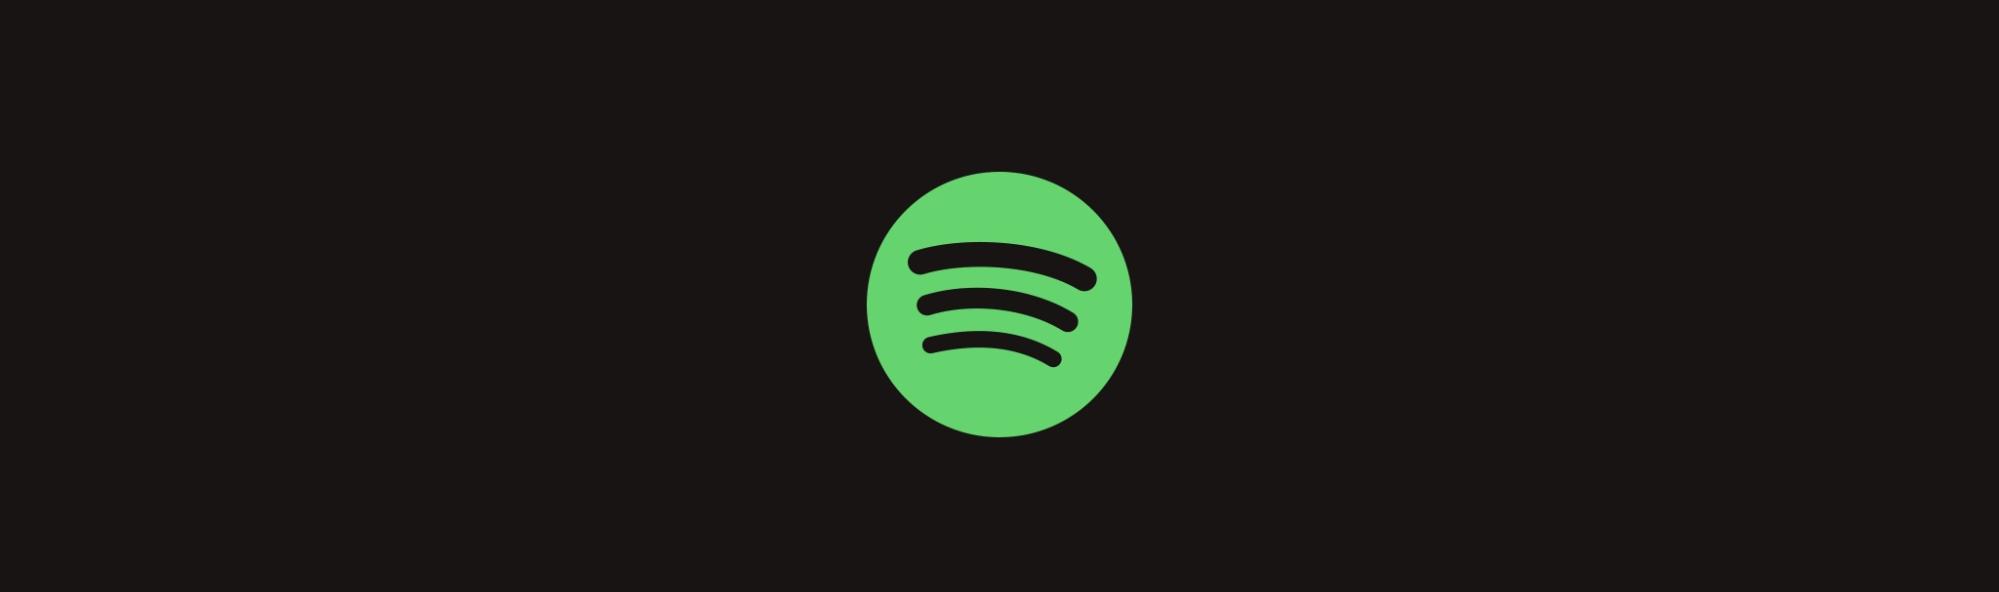 How much is Spotify in Philippines?, How much is a 1 year subscription to Spotify?, How much is monthly for Spotify?, Can I pay Spotify using GCash?, Is Spotify free on globe?, How do I pay for Spotify Premium Philippines?, How do I cancel Spotify through GCash?, Does Spotify automatically charge you?, how much is spotify premium in philippines, how much is spotify per month philippines, is spotify available in philippines, why is spotify cheaper in the philippines, where to pay spotify premium in philippines, how much is spotify premium per month philippines, how much is subscription for spotify,